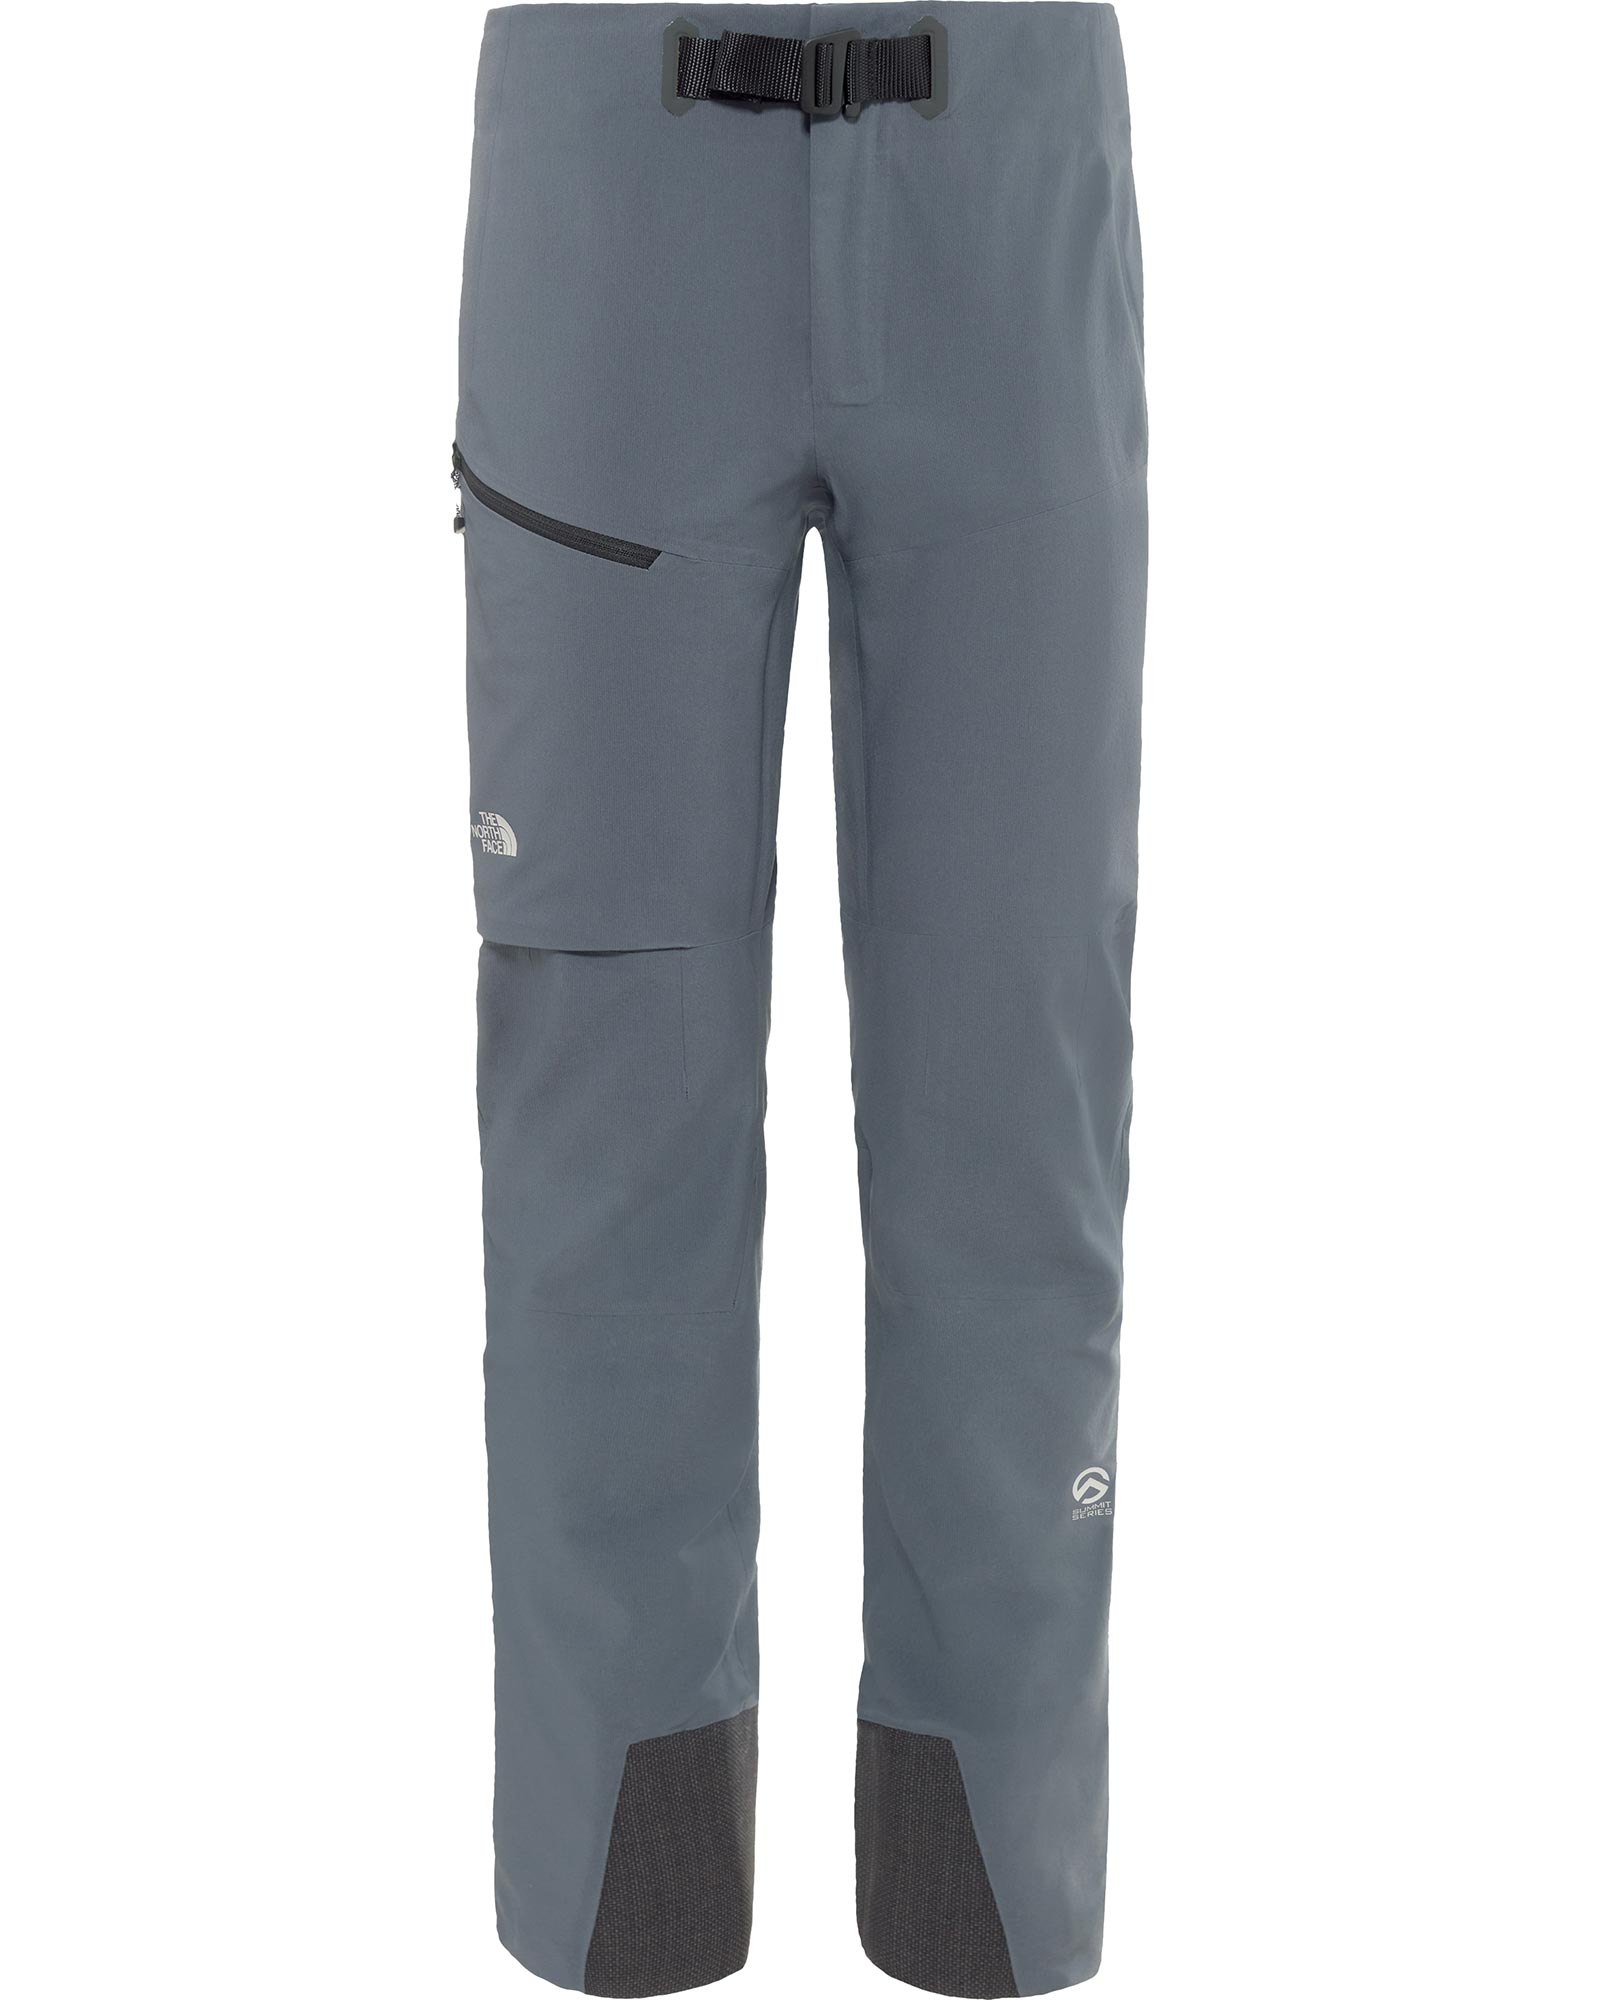 The North Face Proprius L4 Soft Shell Women’s Pants - Turbulence Grey M